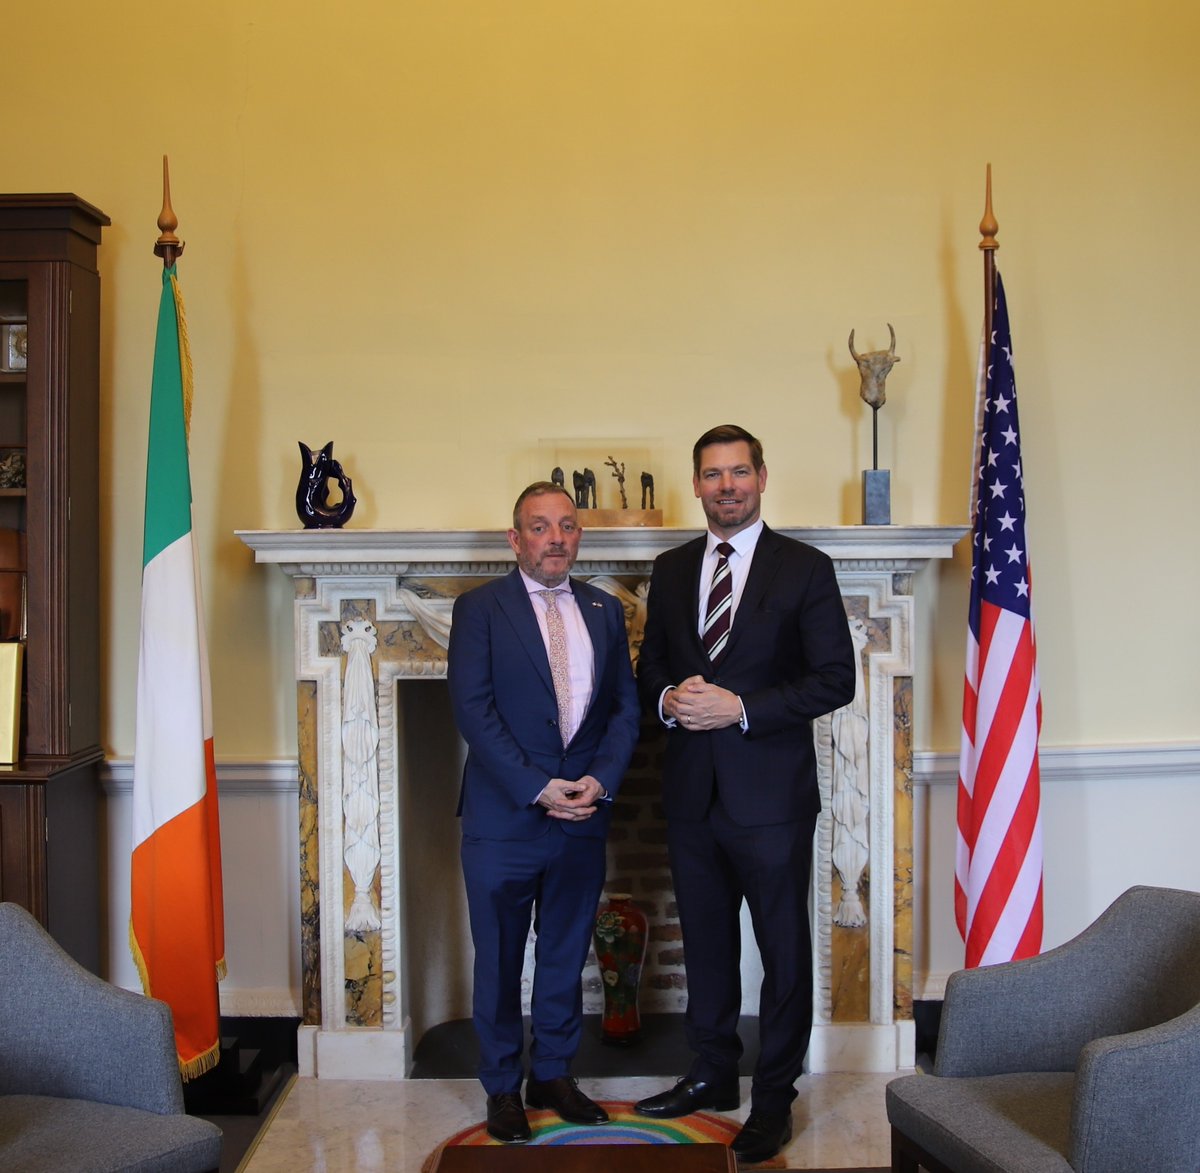 Today, the Cathaoirleach of Seanad Éireann, Jerry Buttimer, met with the U.S. Representative for California's Fourteenth Congressional District, Eric Swalwell, for a Courtesy Call. #SeeForYourself 📸bit.ly/3WcZd2G